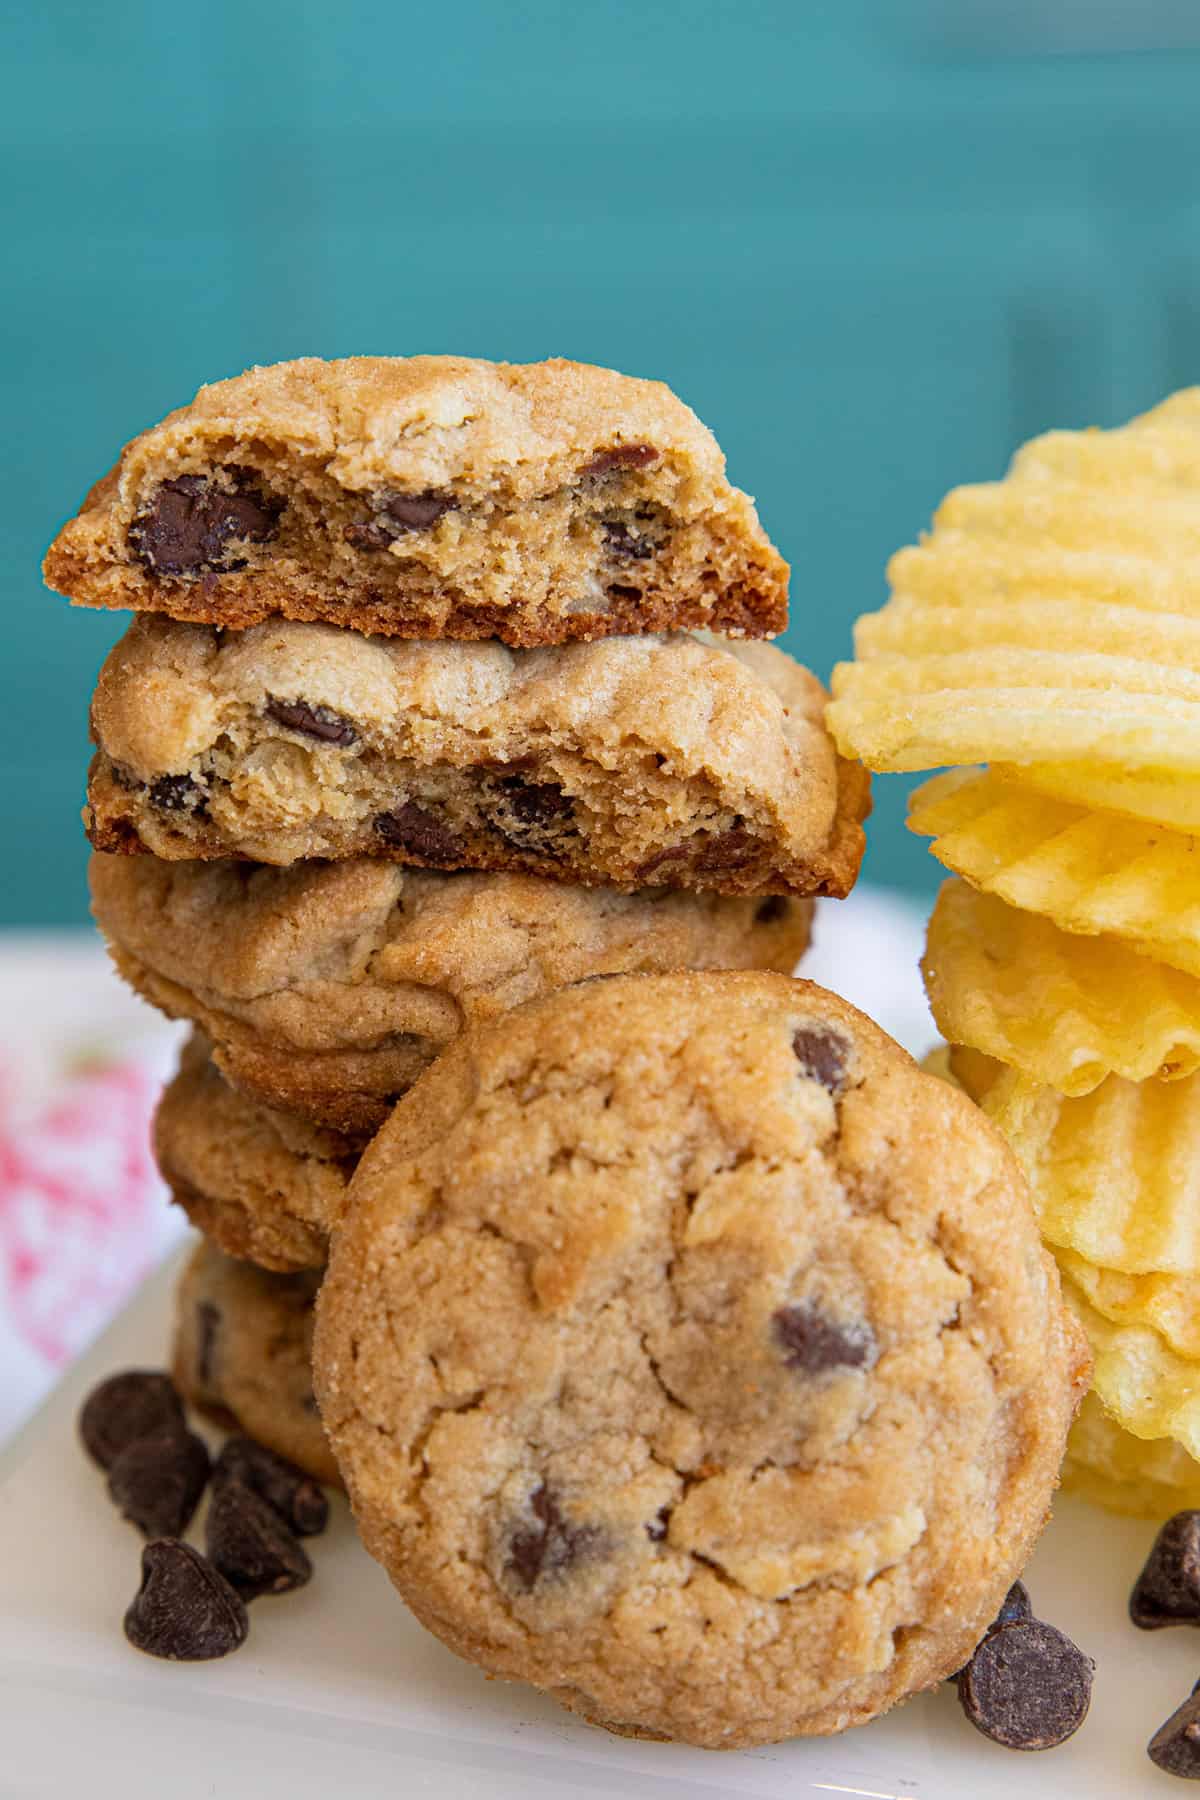 11 Uses for Cookie Scoops ~Sweet & Savory